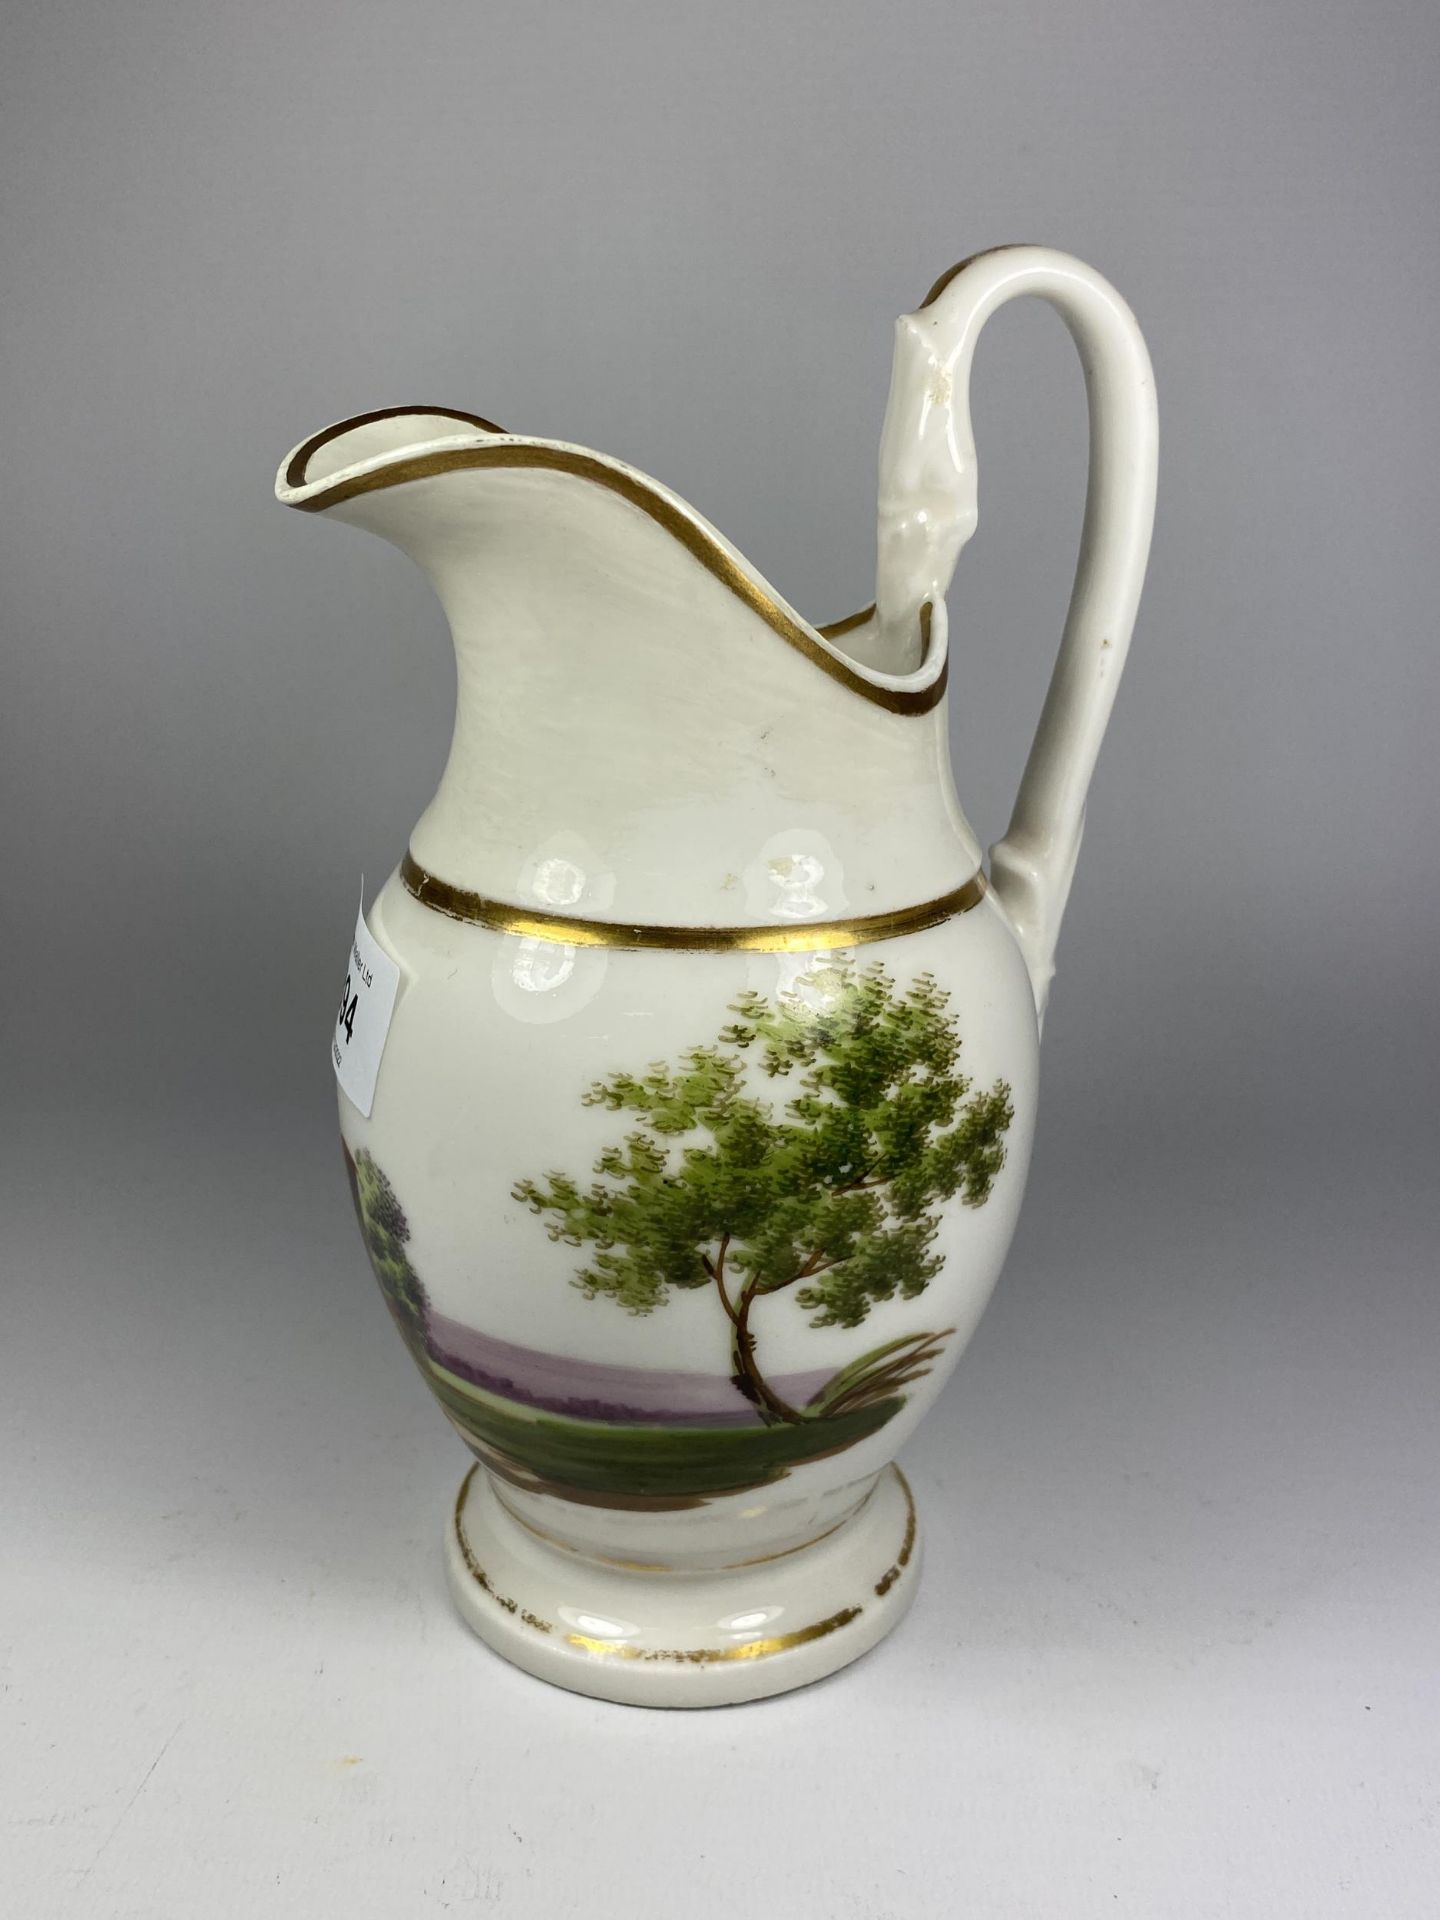 A 19TH CENTURY PORCELAIN JUG WITH HAND PAINTED MANOR HOUSE DESIGN - Image 2 of 4